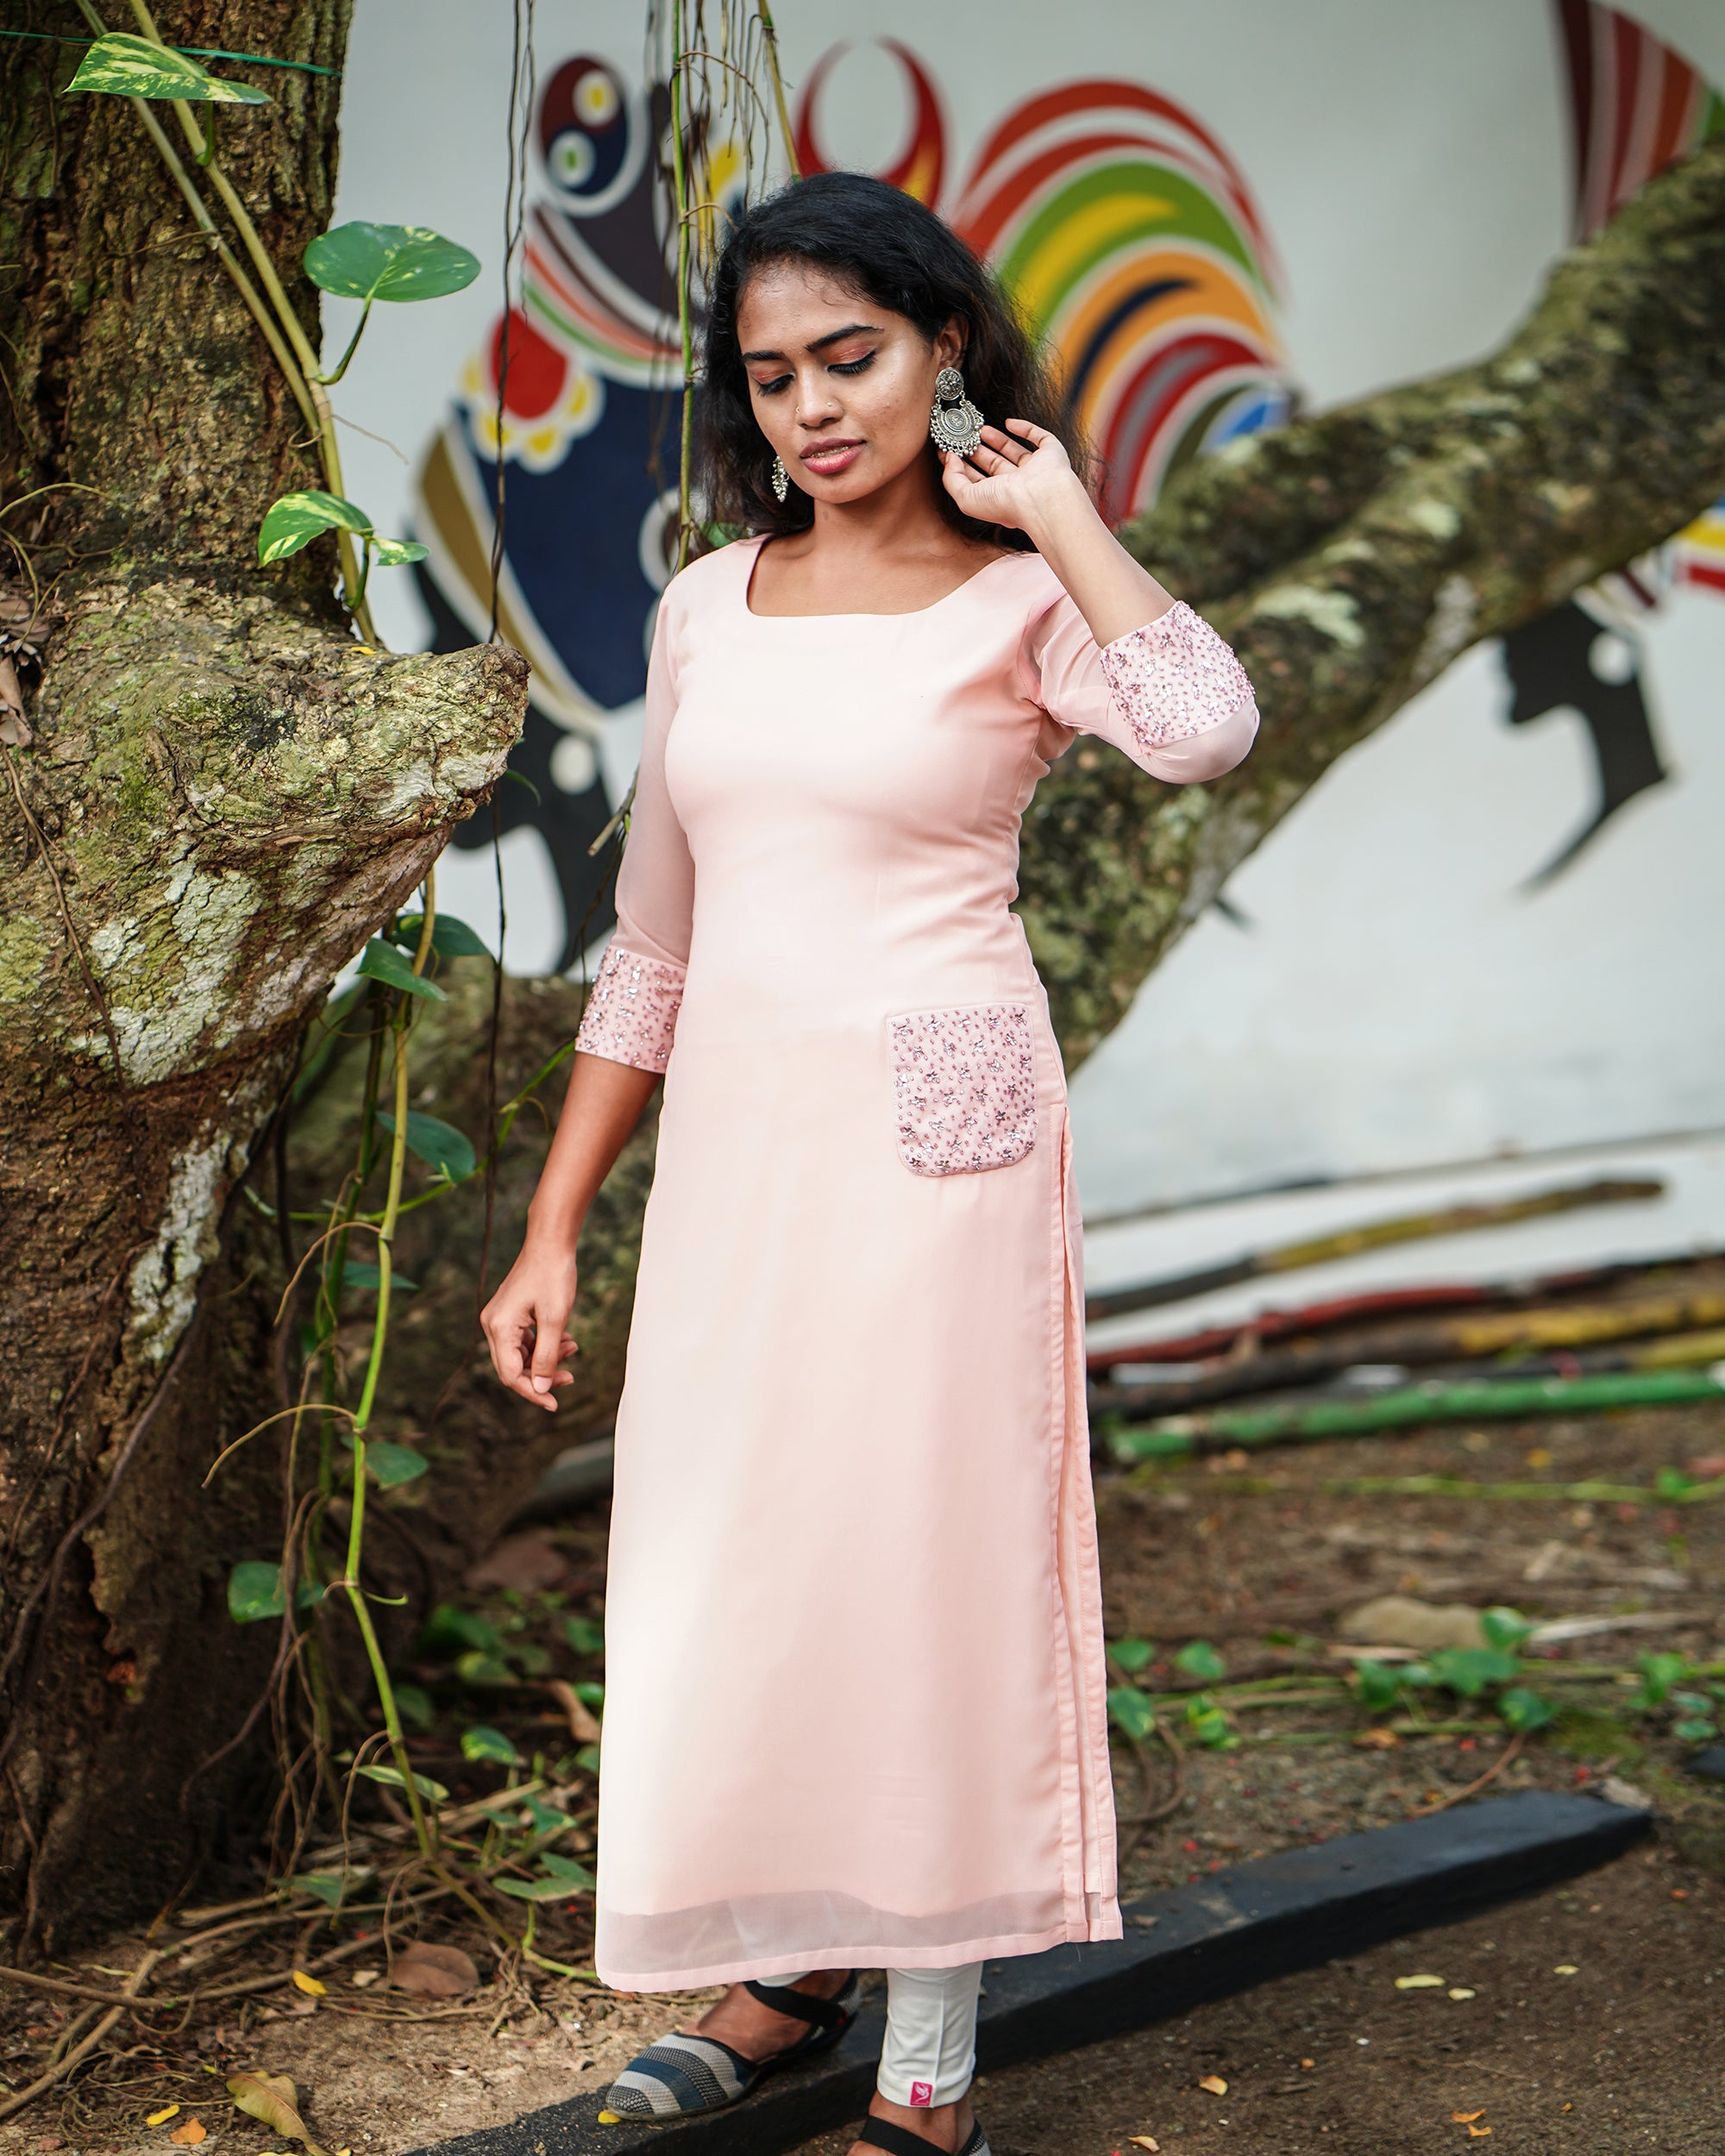 Kerala Edakka Kurti - Onam Collection | Kerala Edakka Kurti: ₹4900 👇 A  handmade Kerala Kurti with hand painting of Edakka Motifs by artists. It's  embellished with embroidery in green and red... | By VedhikaFacebook